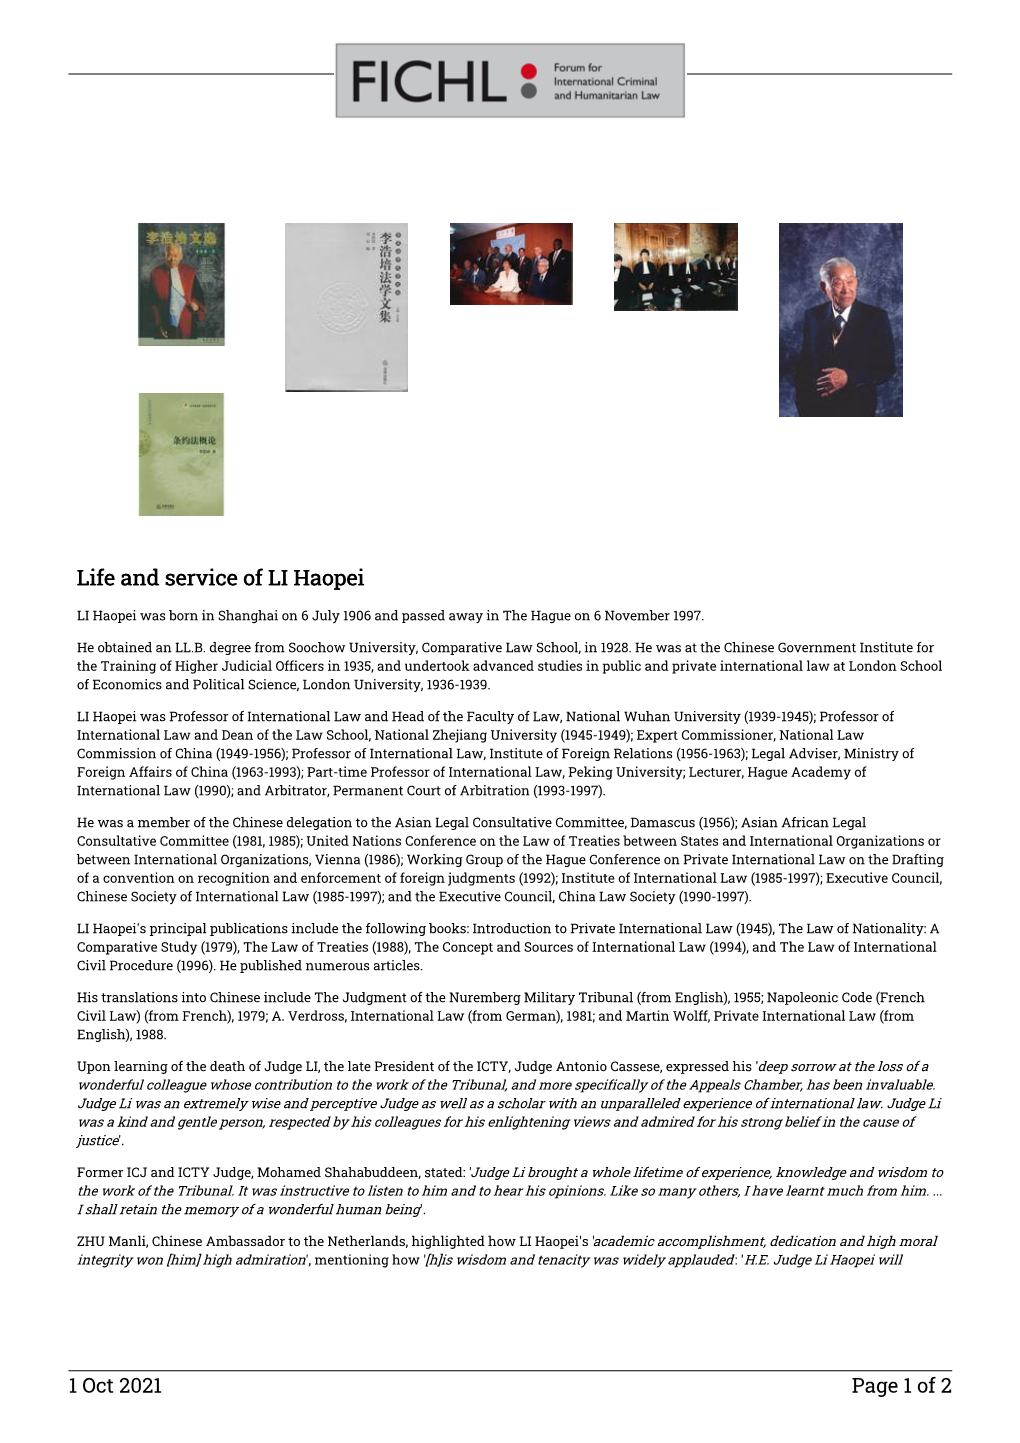 Life and Service of LI Haopei 26 Jun 2021 Page 1 of 2